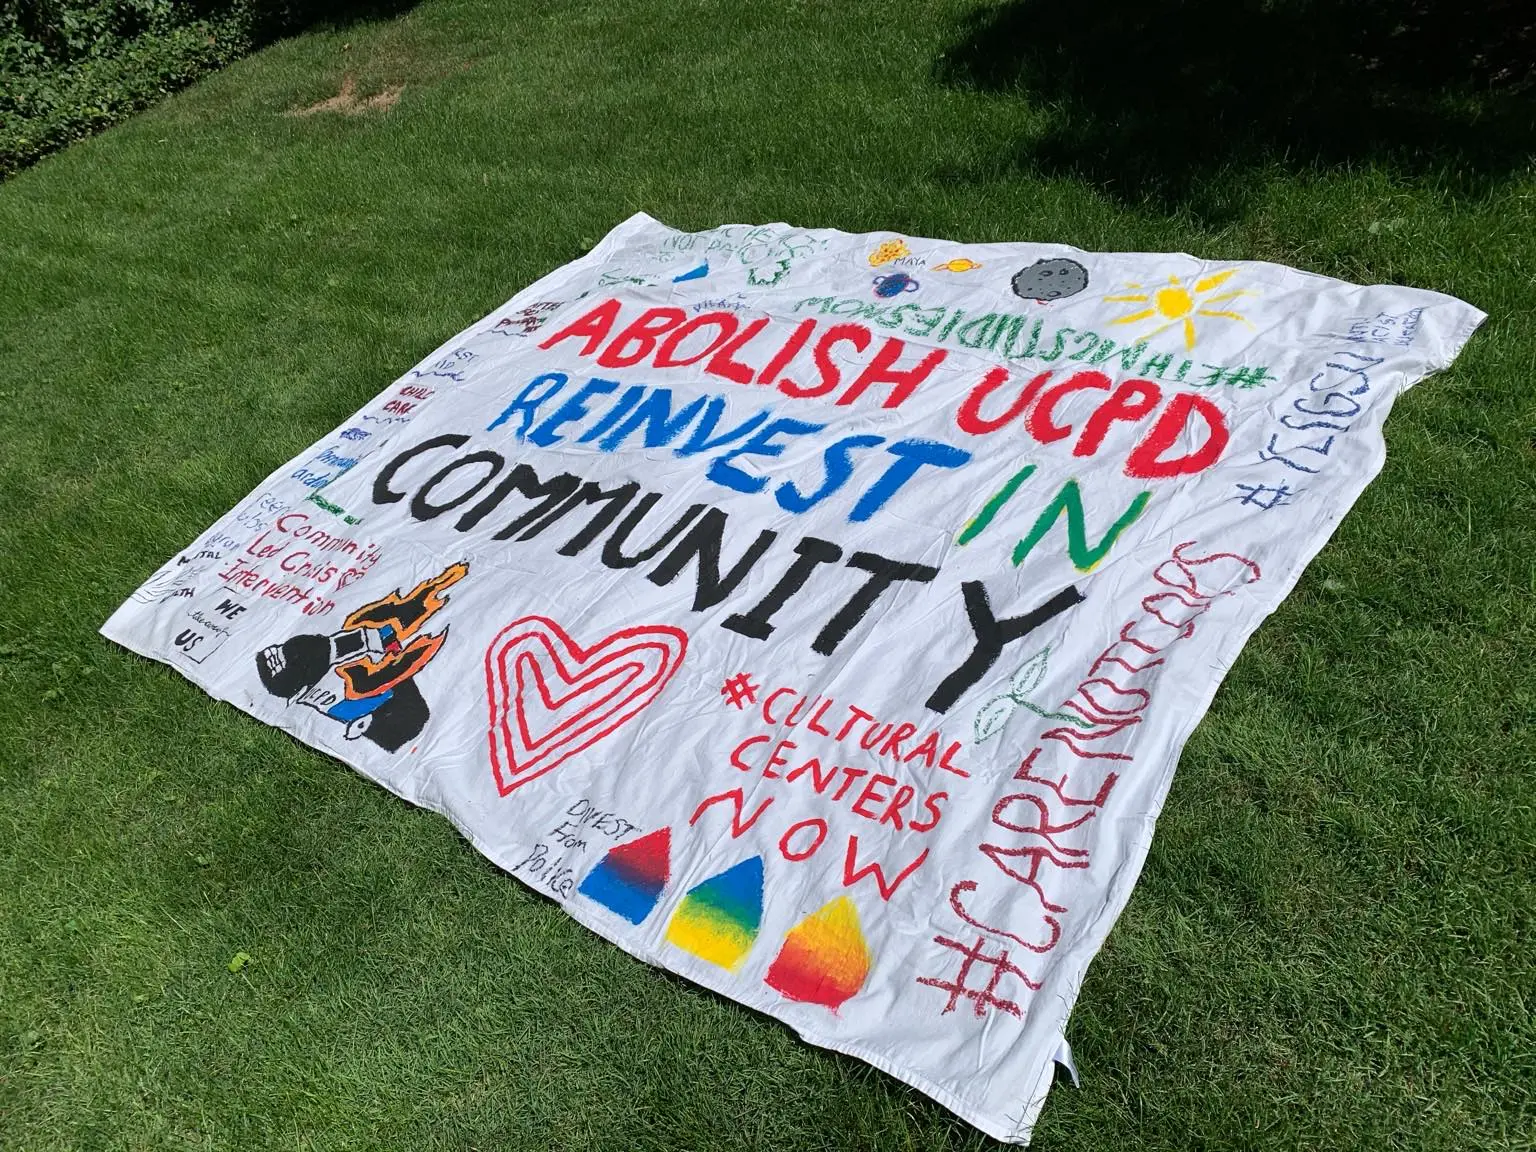 A #CareNotCops banner says "Abolish UCPD Reinvest in Community"